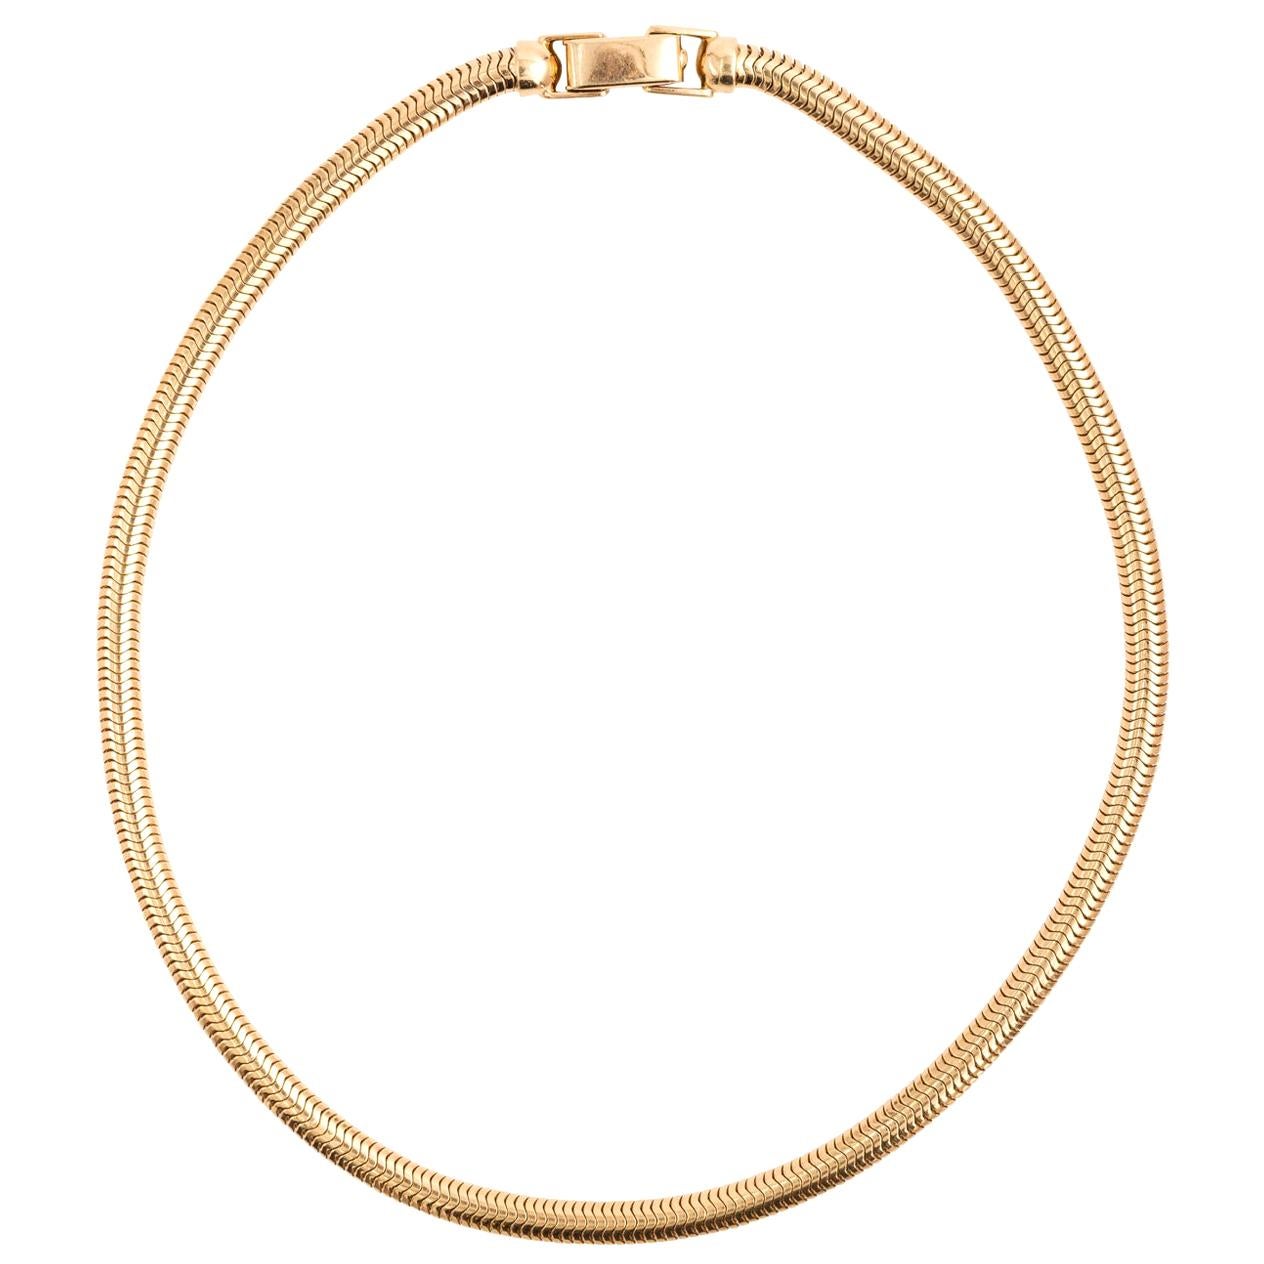 Tiffany & Co. Yellow Gold Snake Chain Necklace